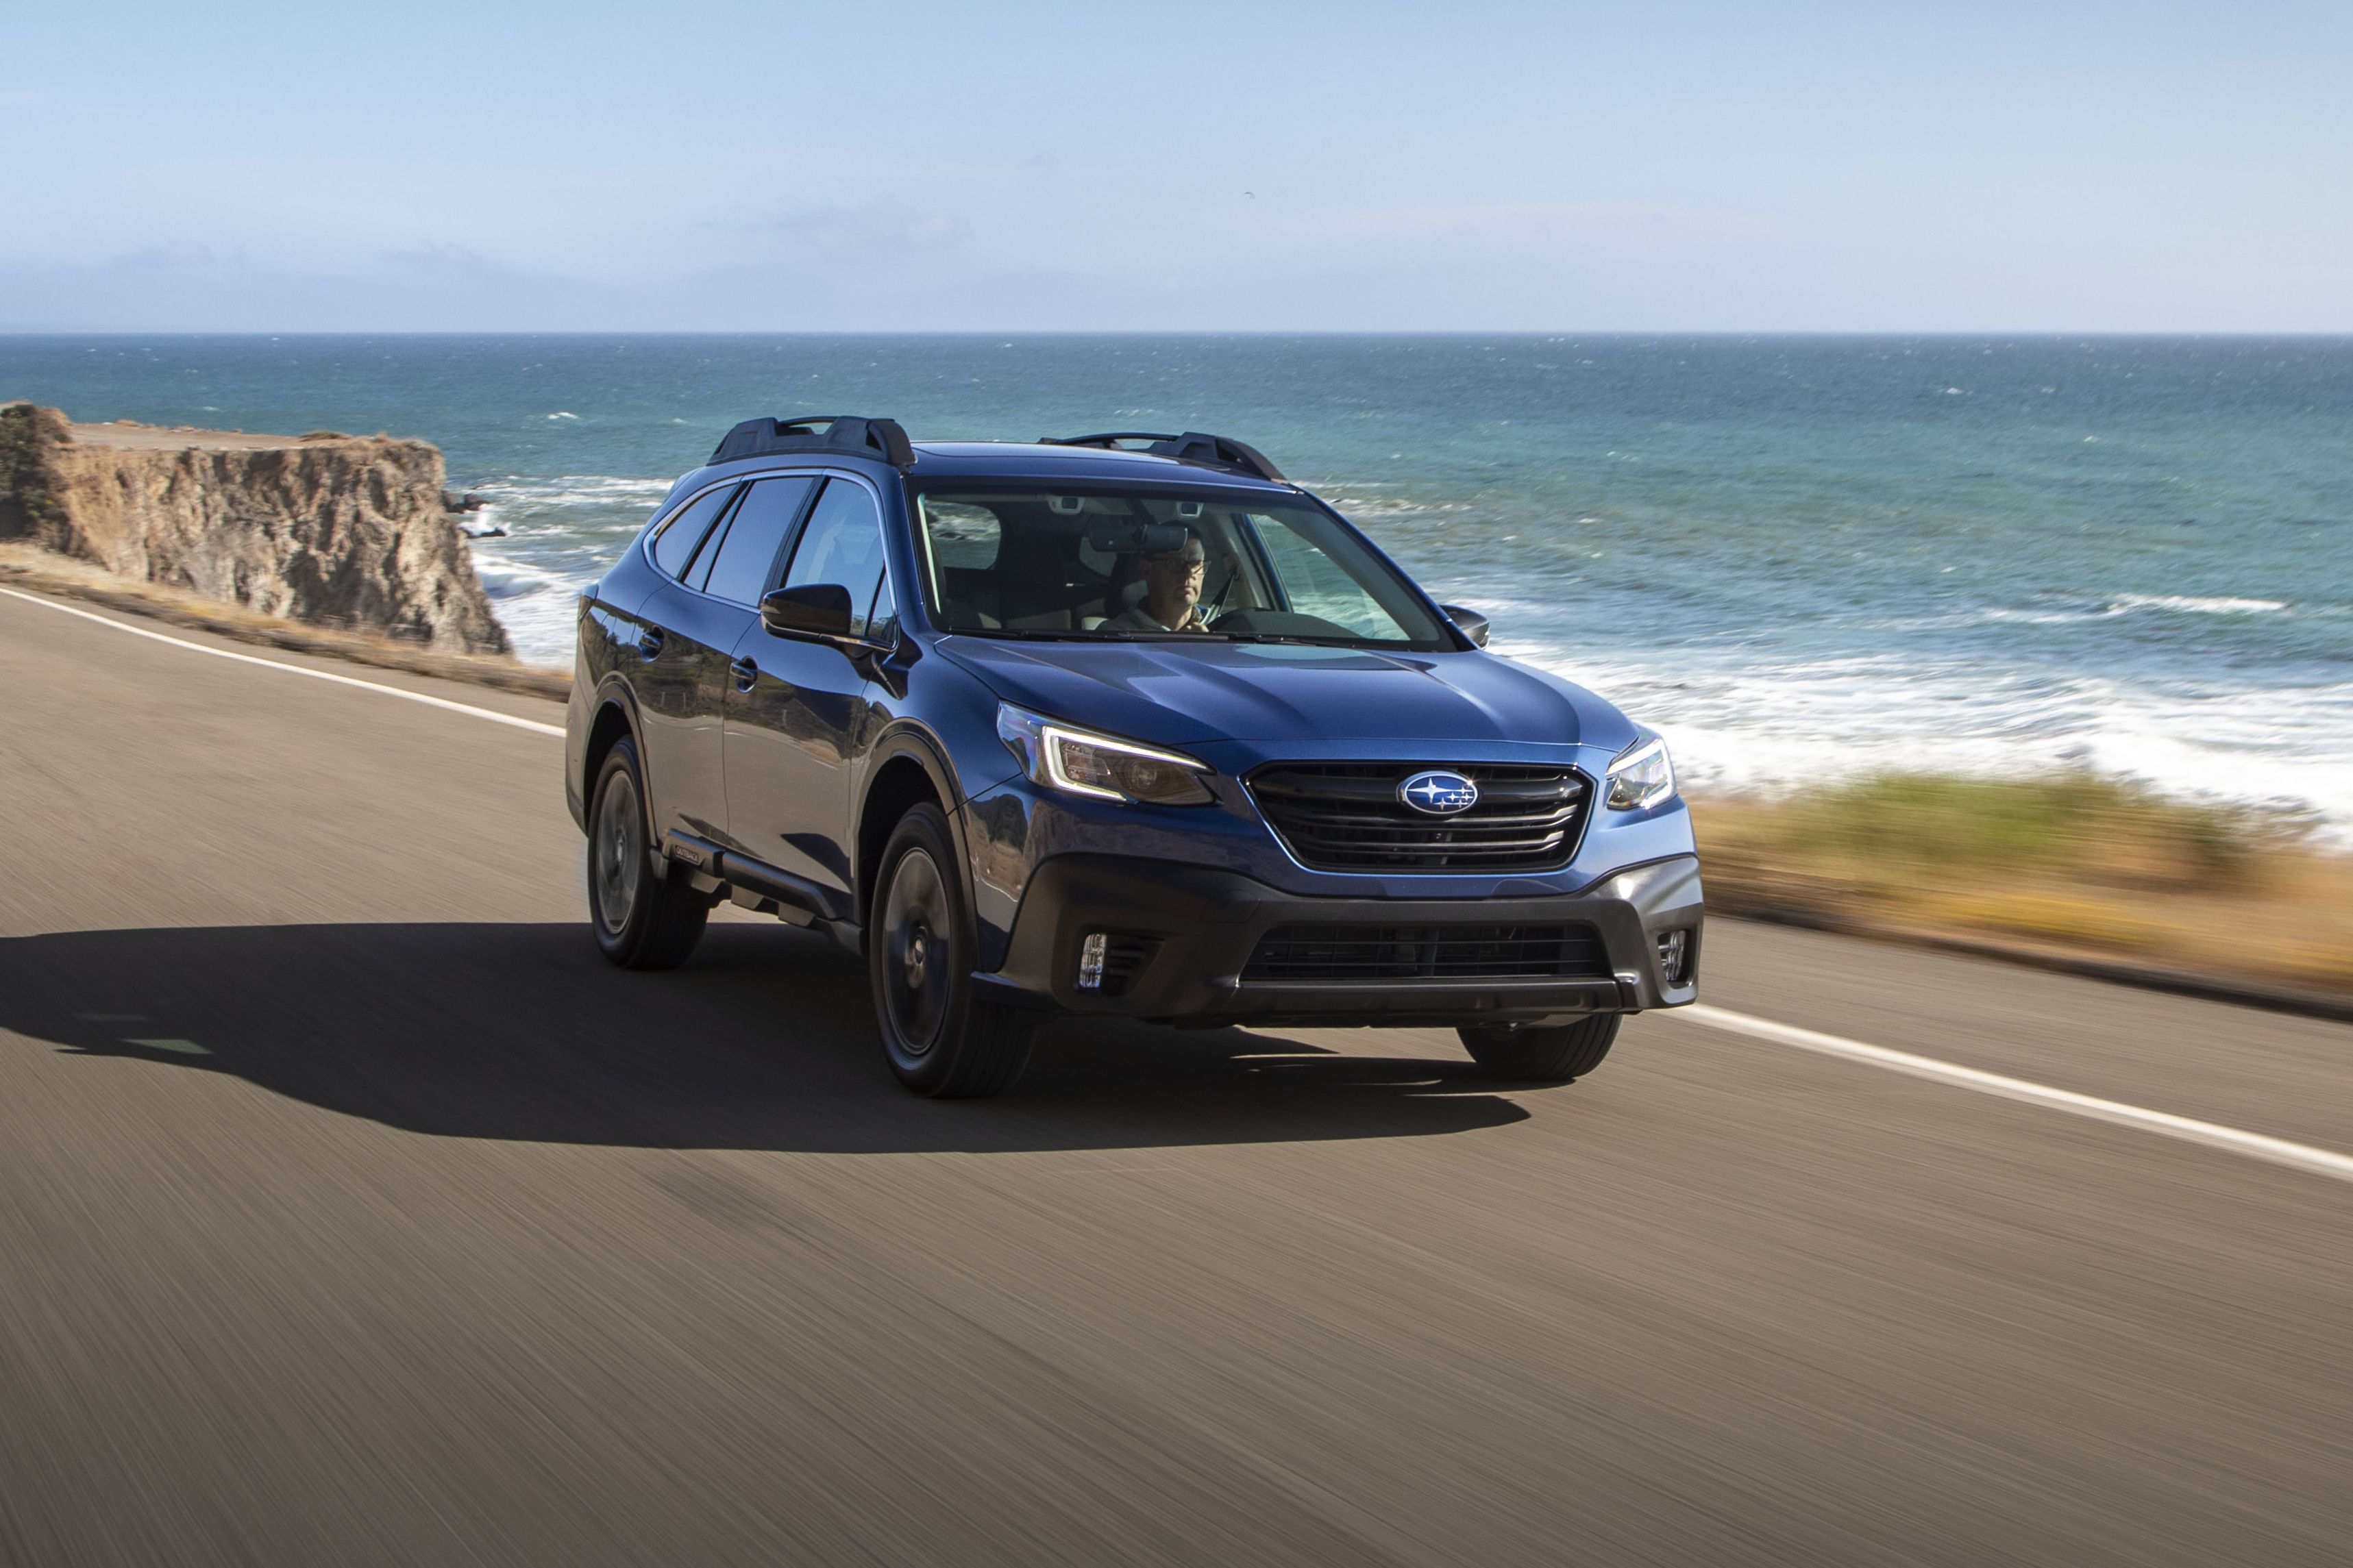 Meander Kanin Regeneration 2021 Subaru Outback Review, Pricing, and Specs